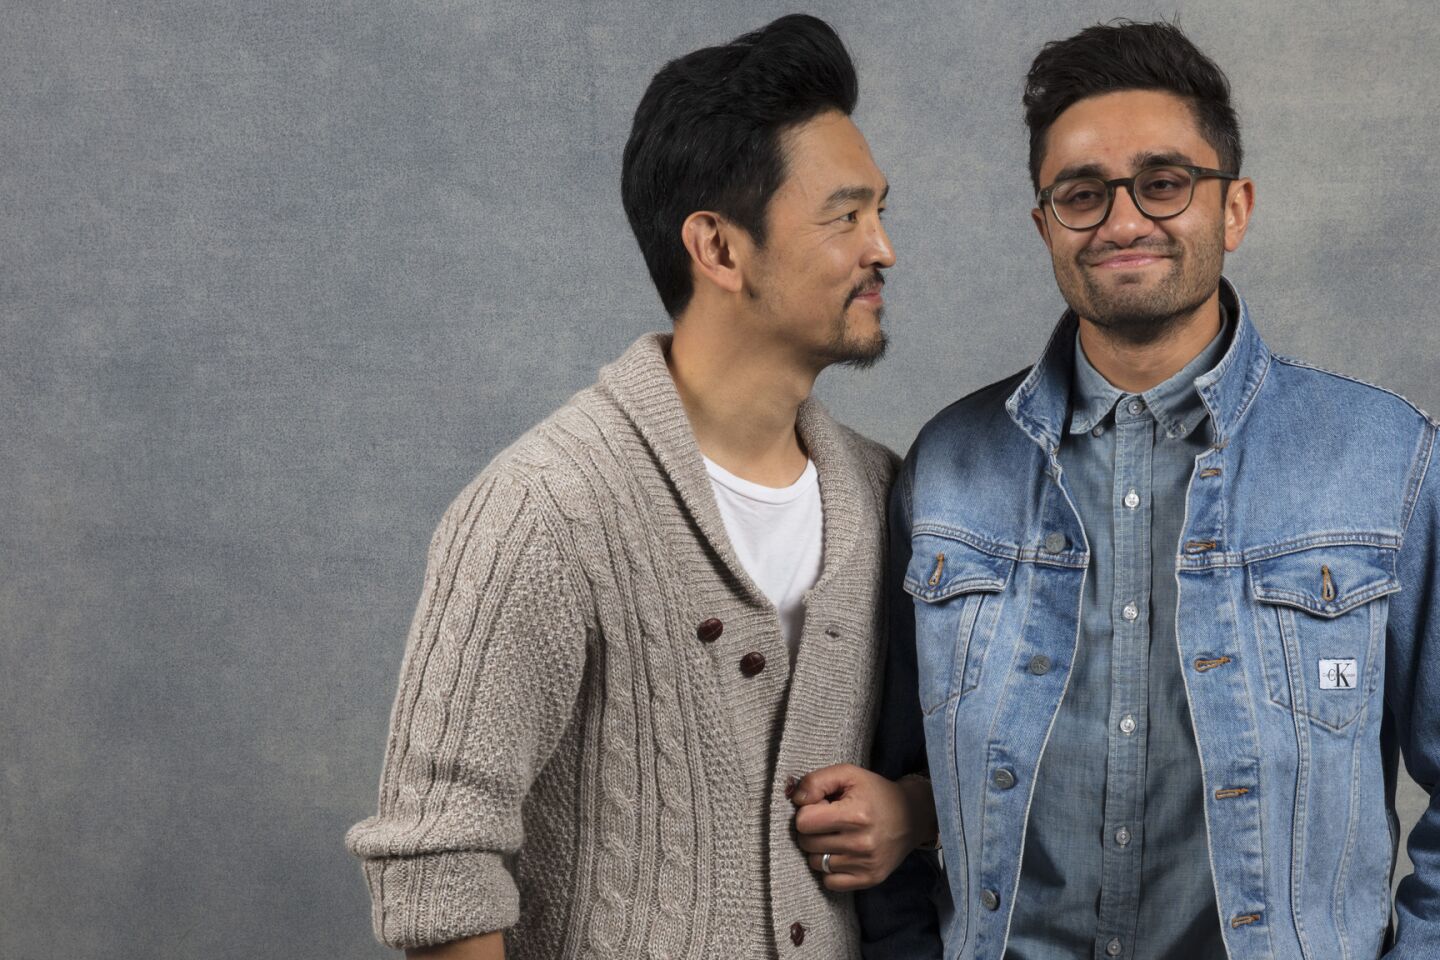 Actor John Cho, left, and director Aneesh Chaganty, from the film "Search."